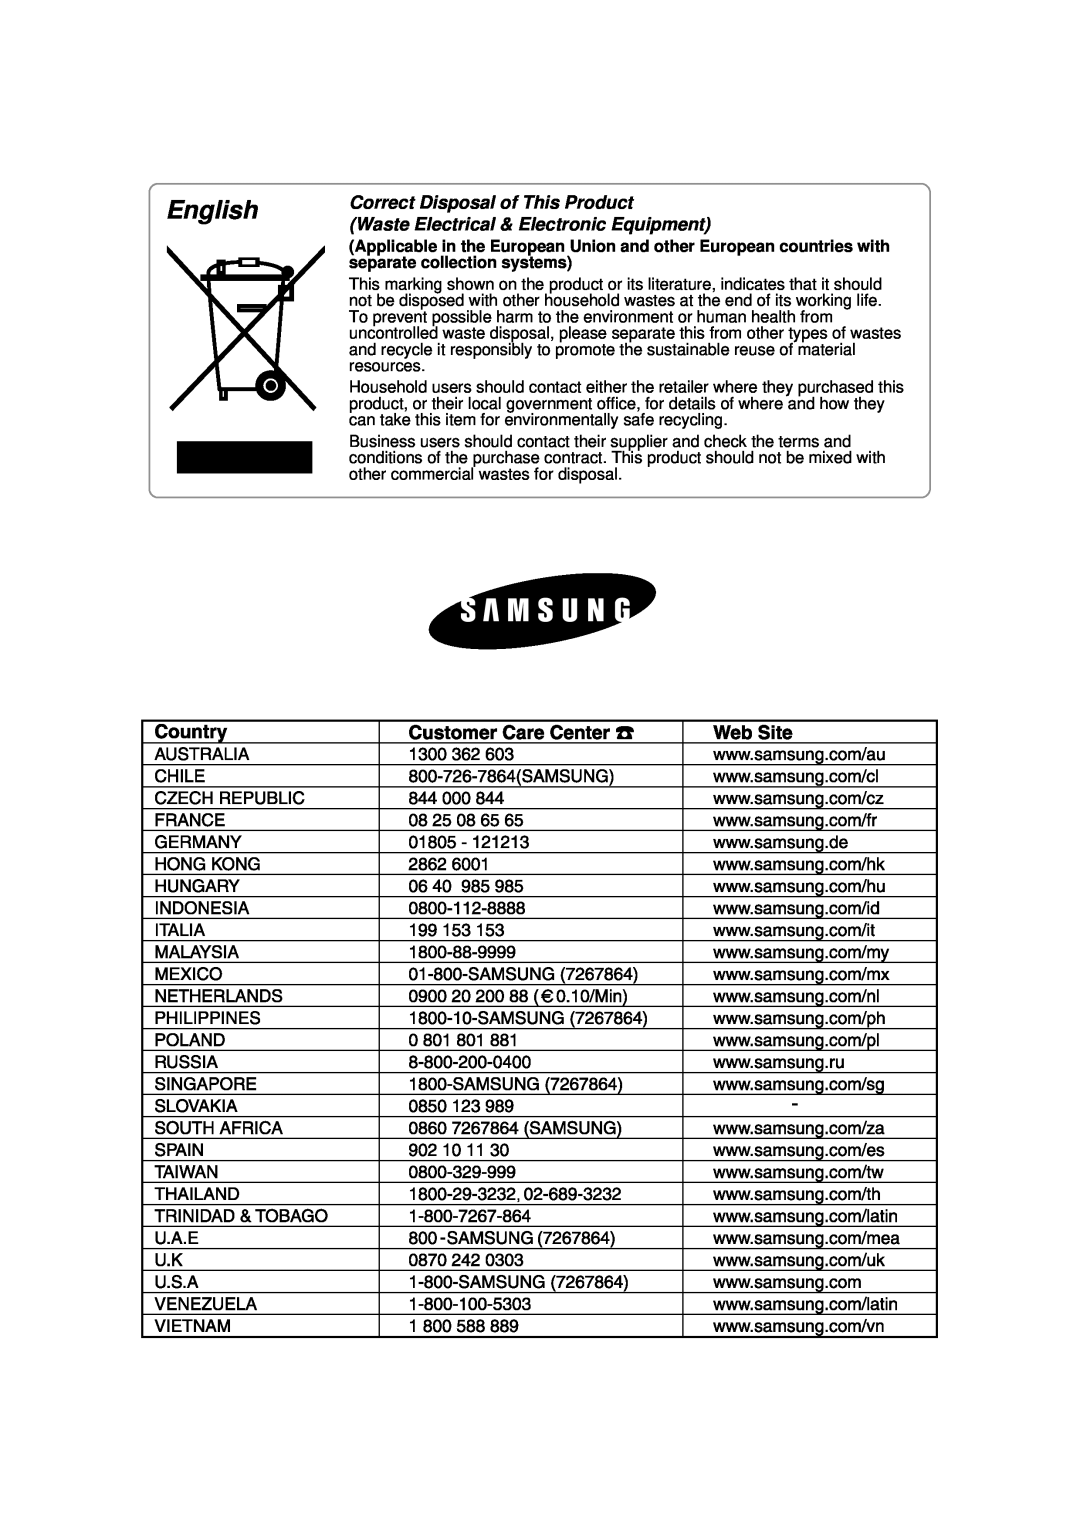 Samsung DA68-01258A owner manual English, Correct Disposal of This Product, Waste Electrical & Electronic Equipment 